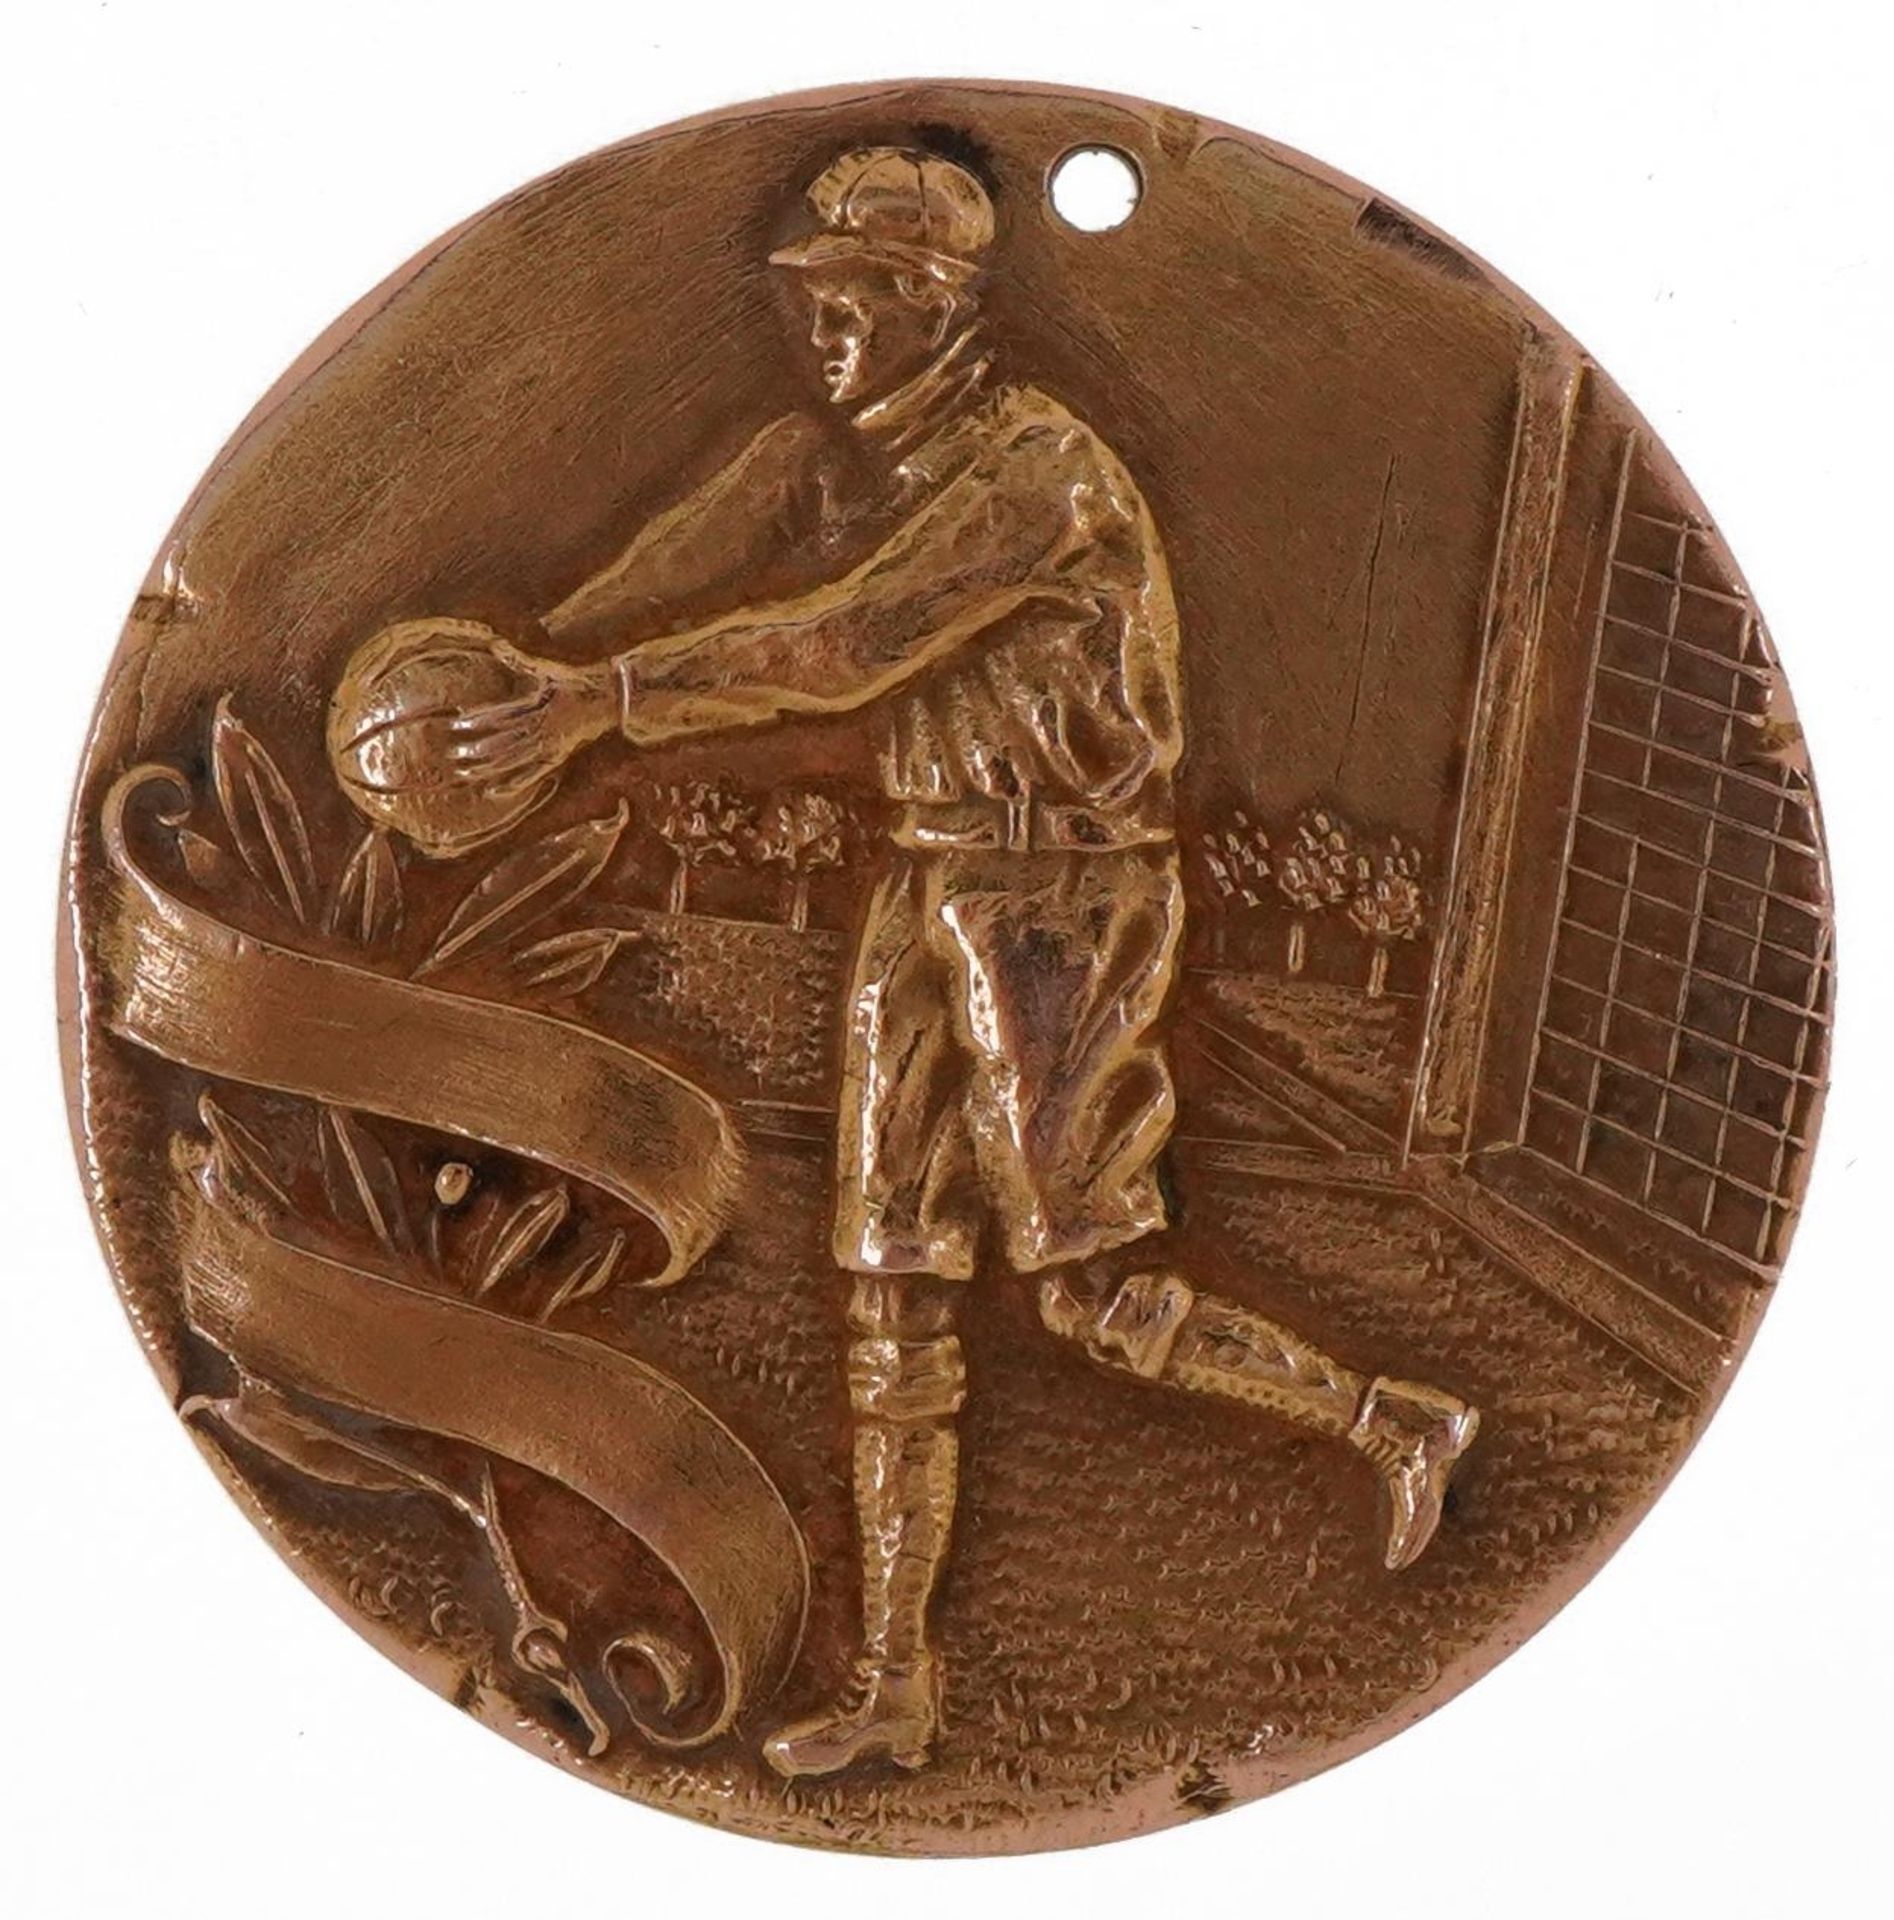 Sporting interest Dieges & Clust 1926 American football gold filled medal for first cast press